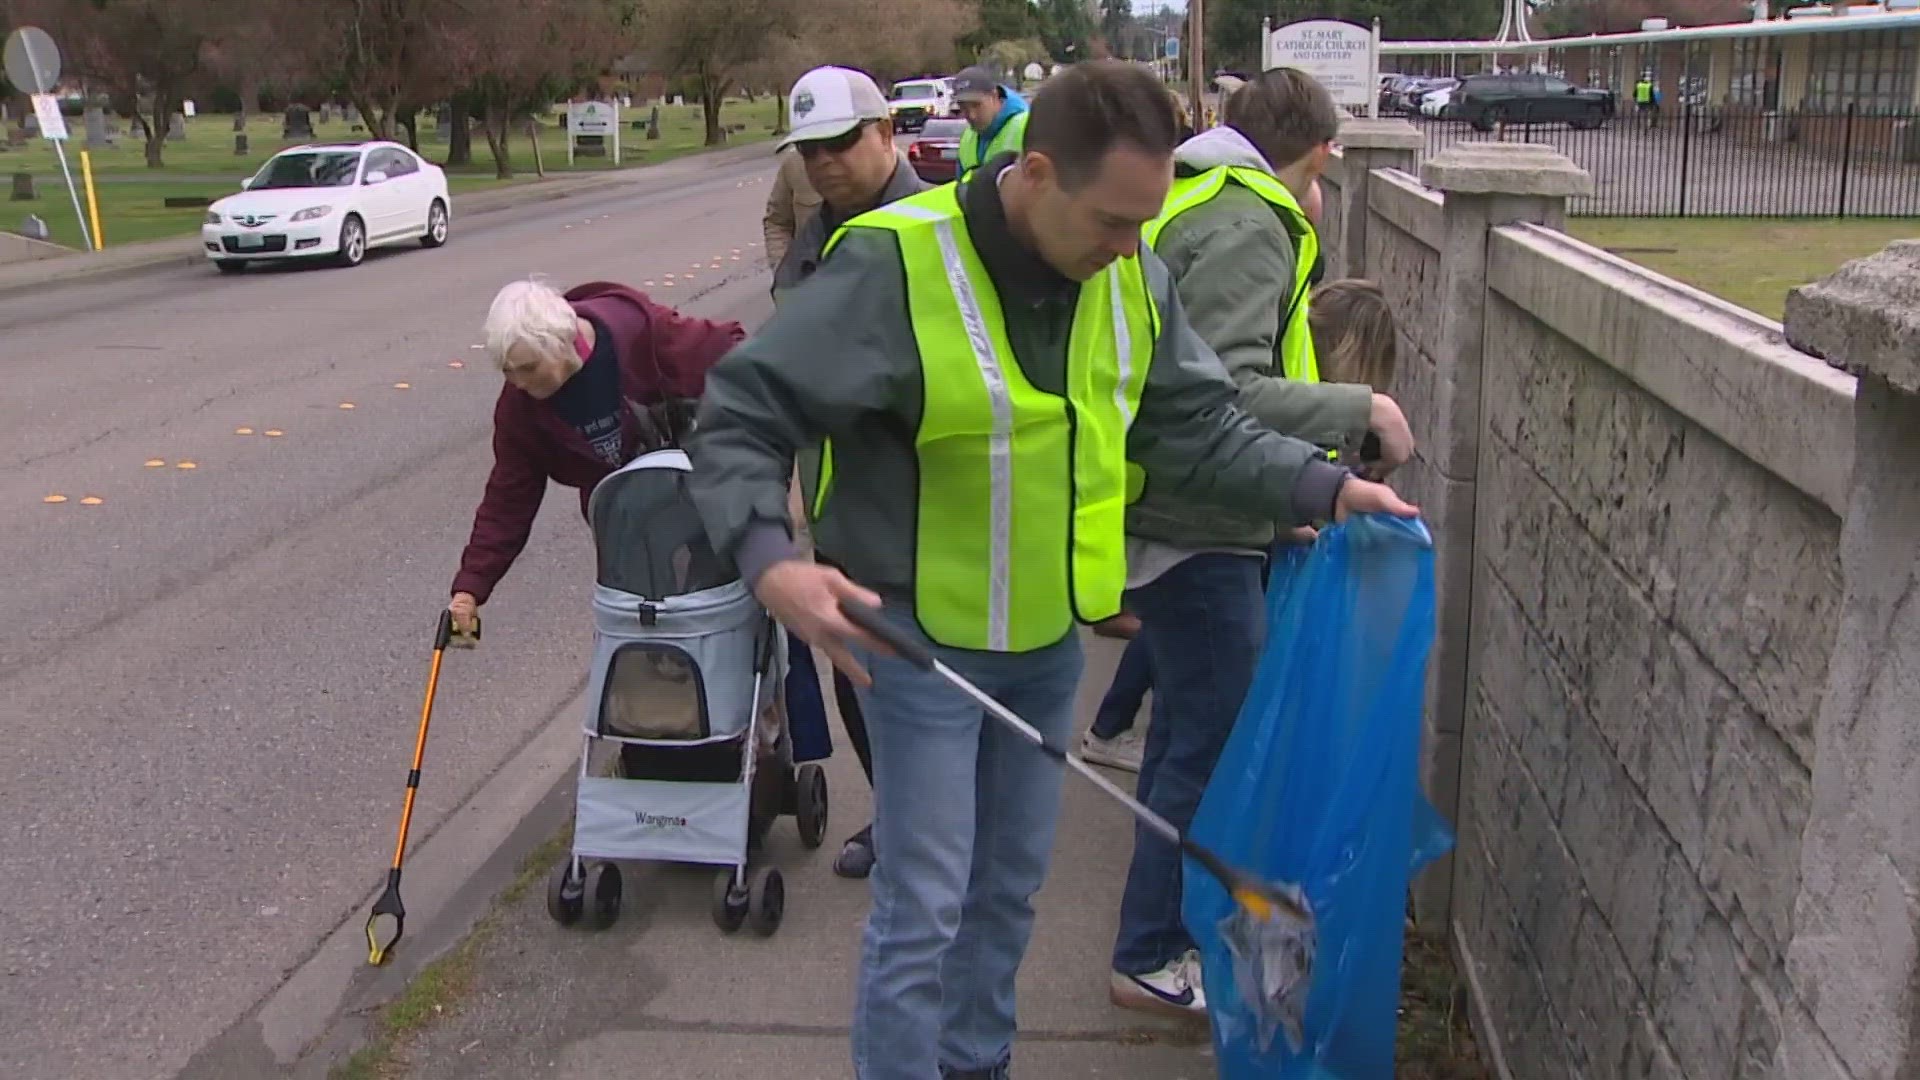 Toni Kief, 74, is helping support the city's struggling anti-litter efforts.